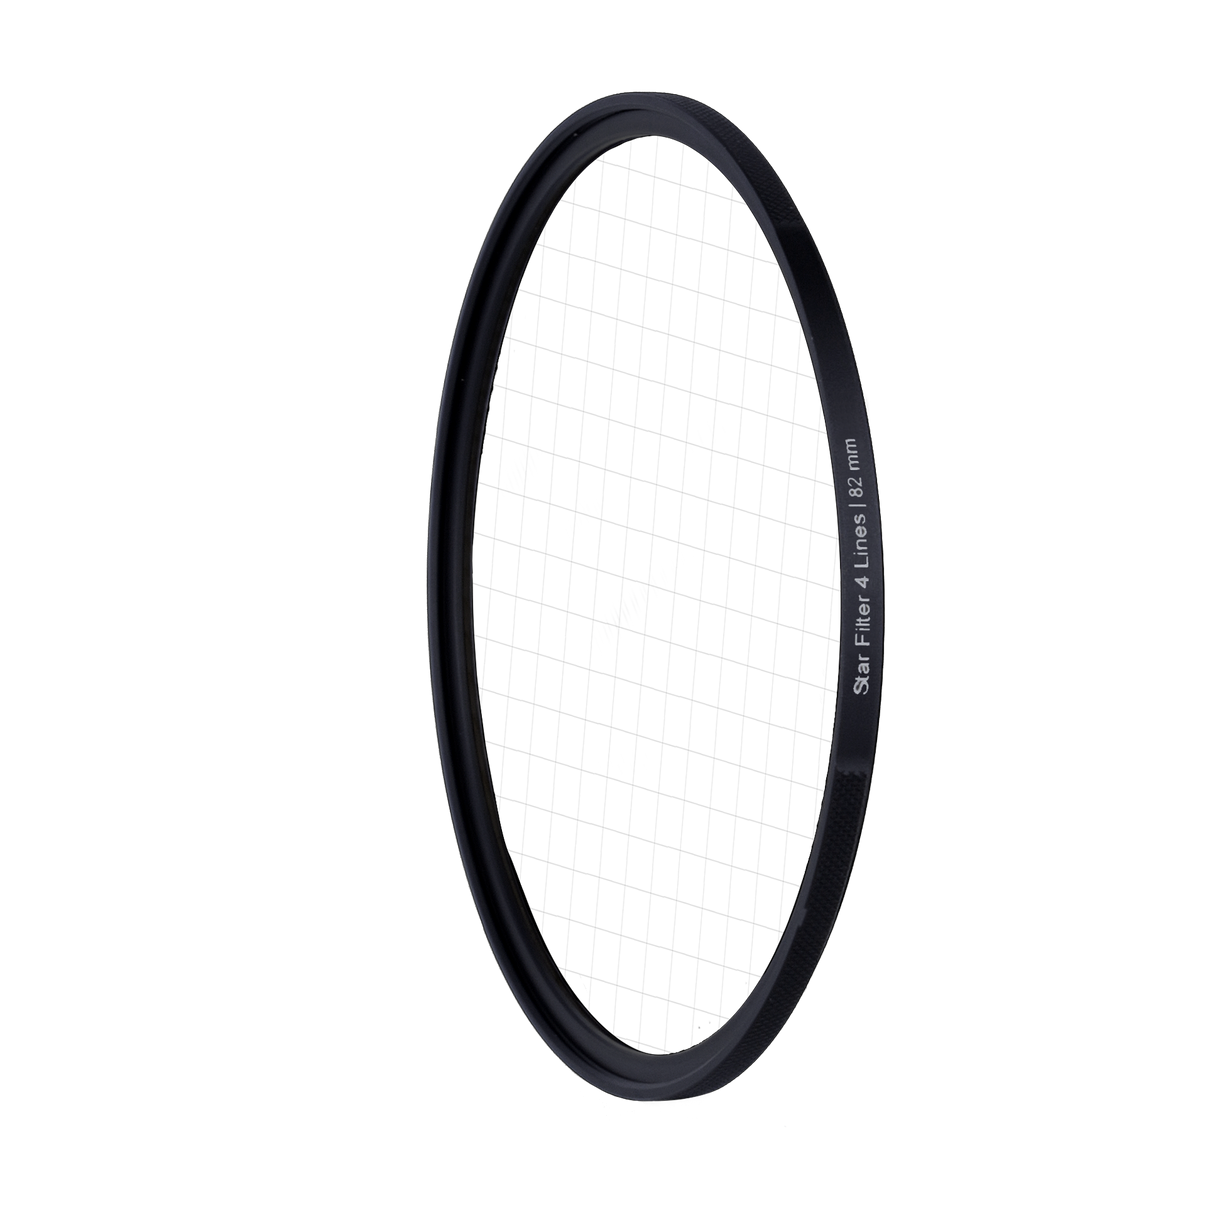 F: x Pro magnetic round filter Mark II 82 mm - star filter 4